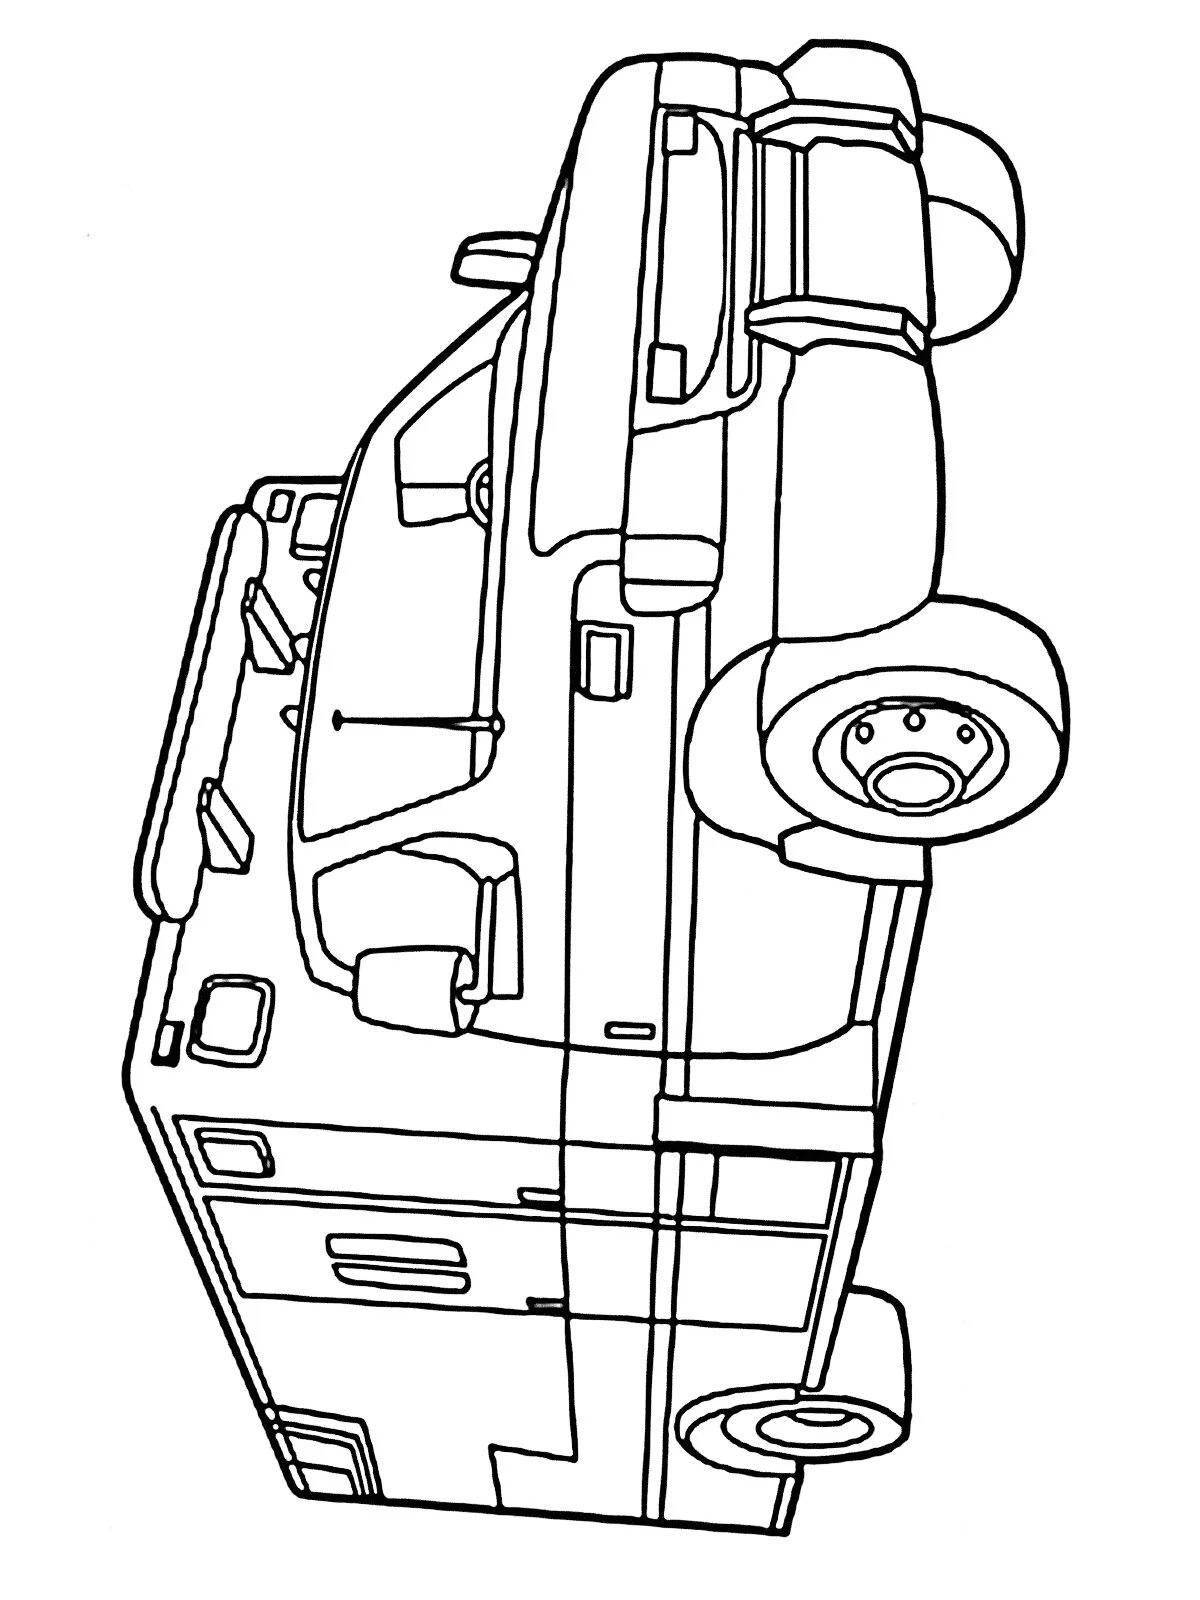 Amazing ambulance coloring page for 3-4 year olds